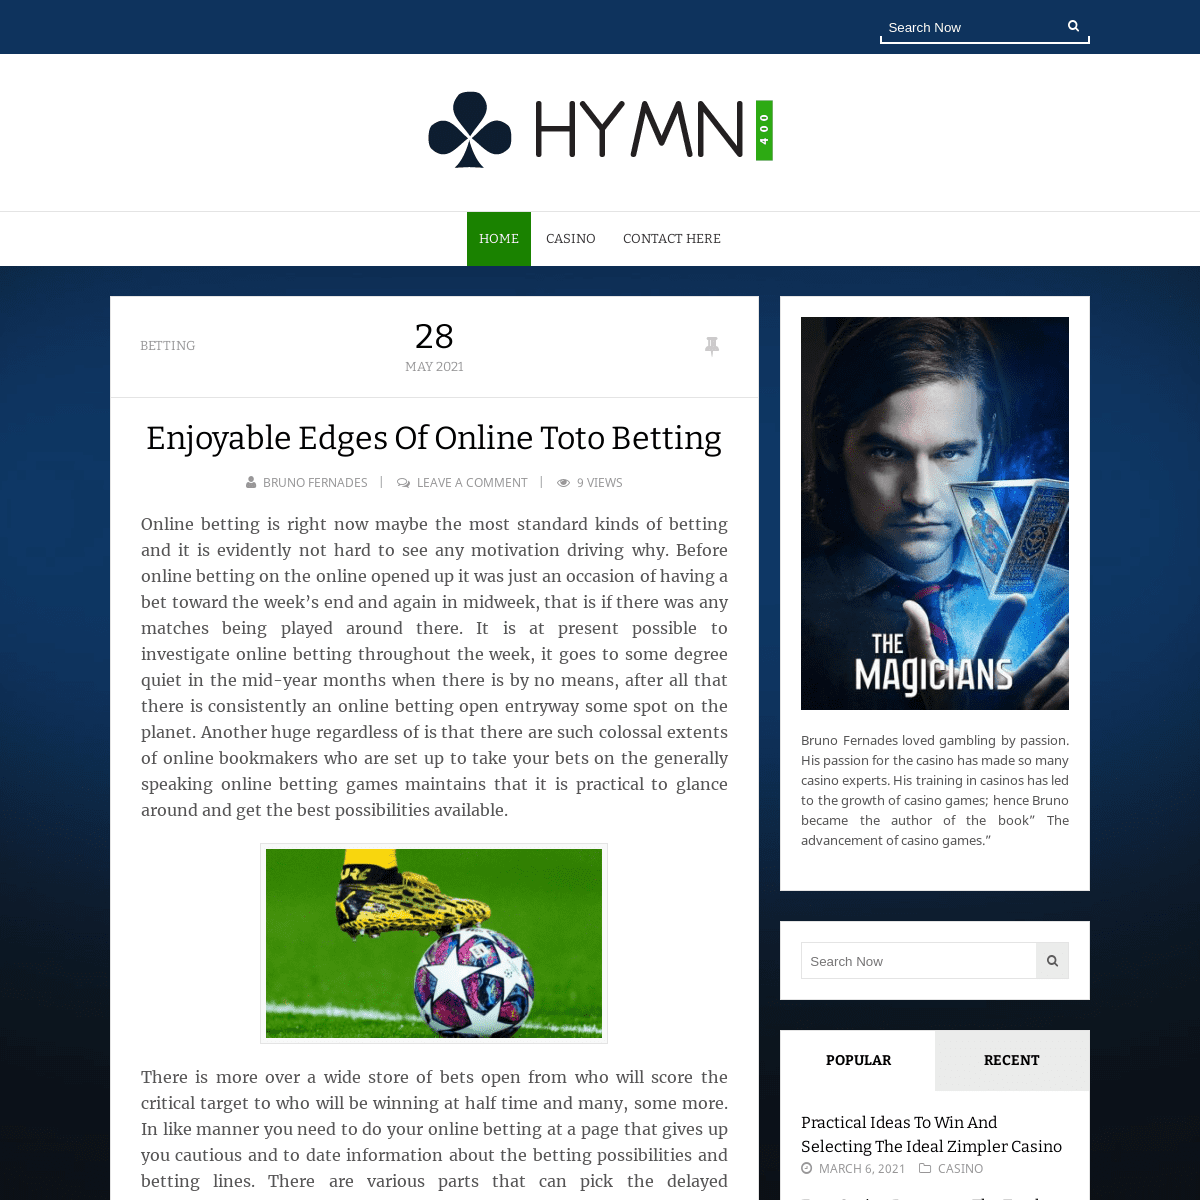 A complete backup of https://hymn400.com